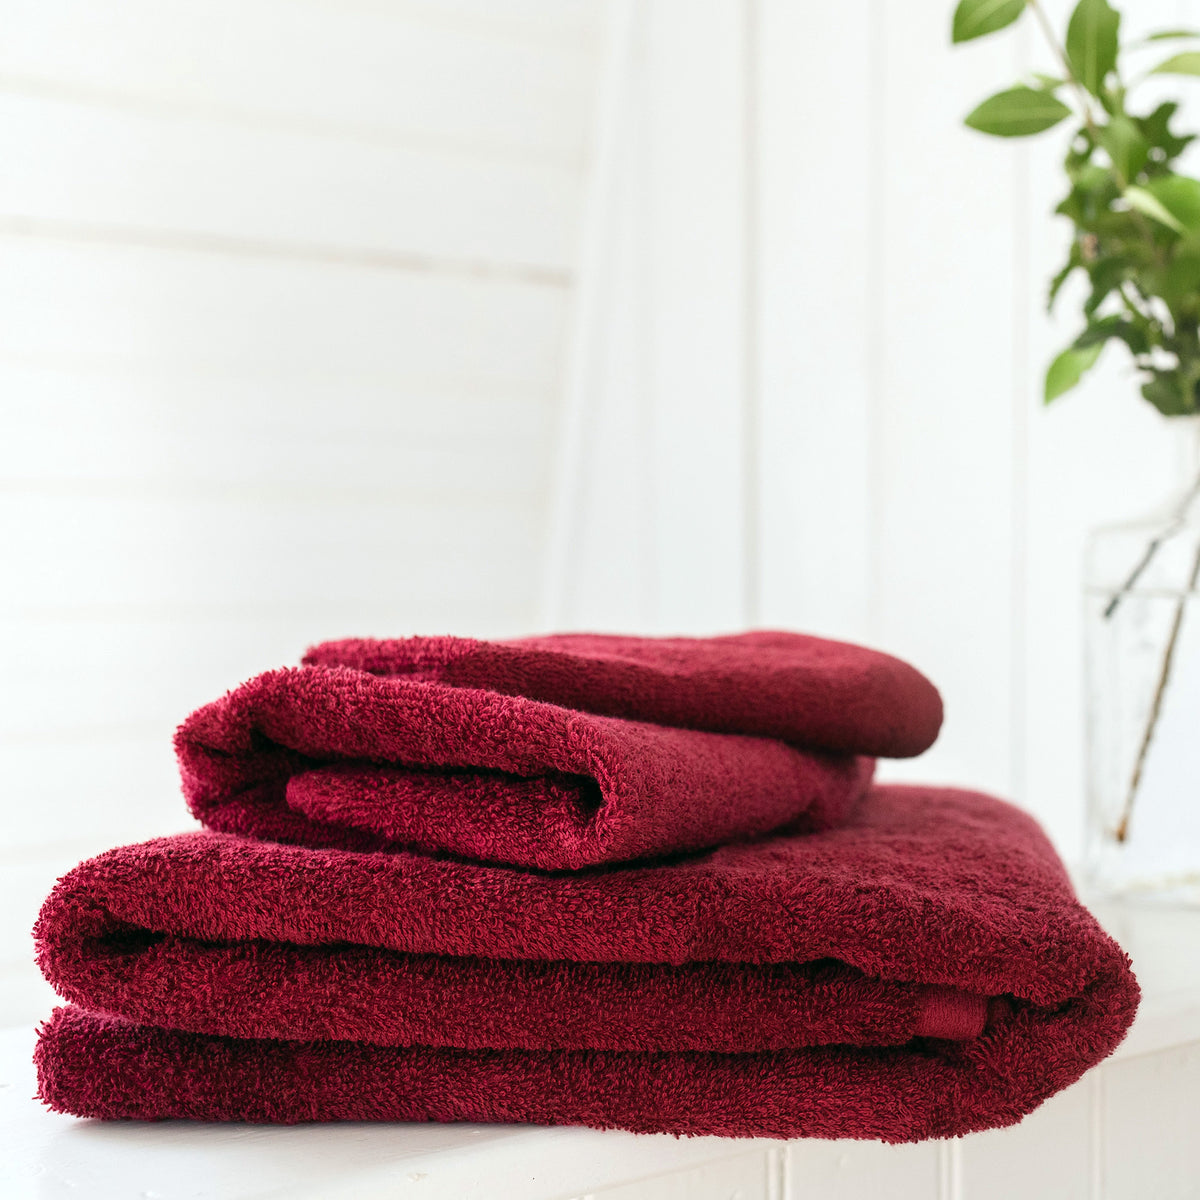 Cranberry - Colorful 100% Cotton Towels - American Blanket Company